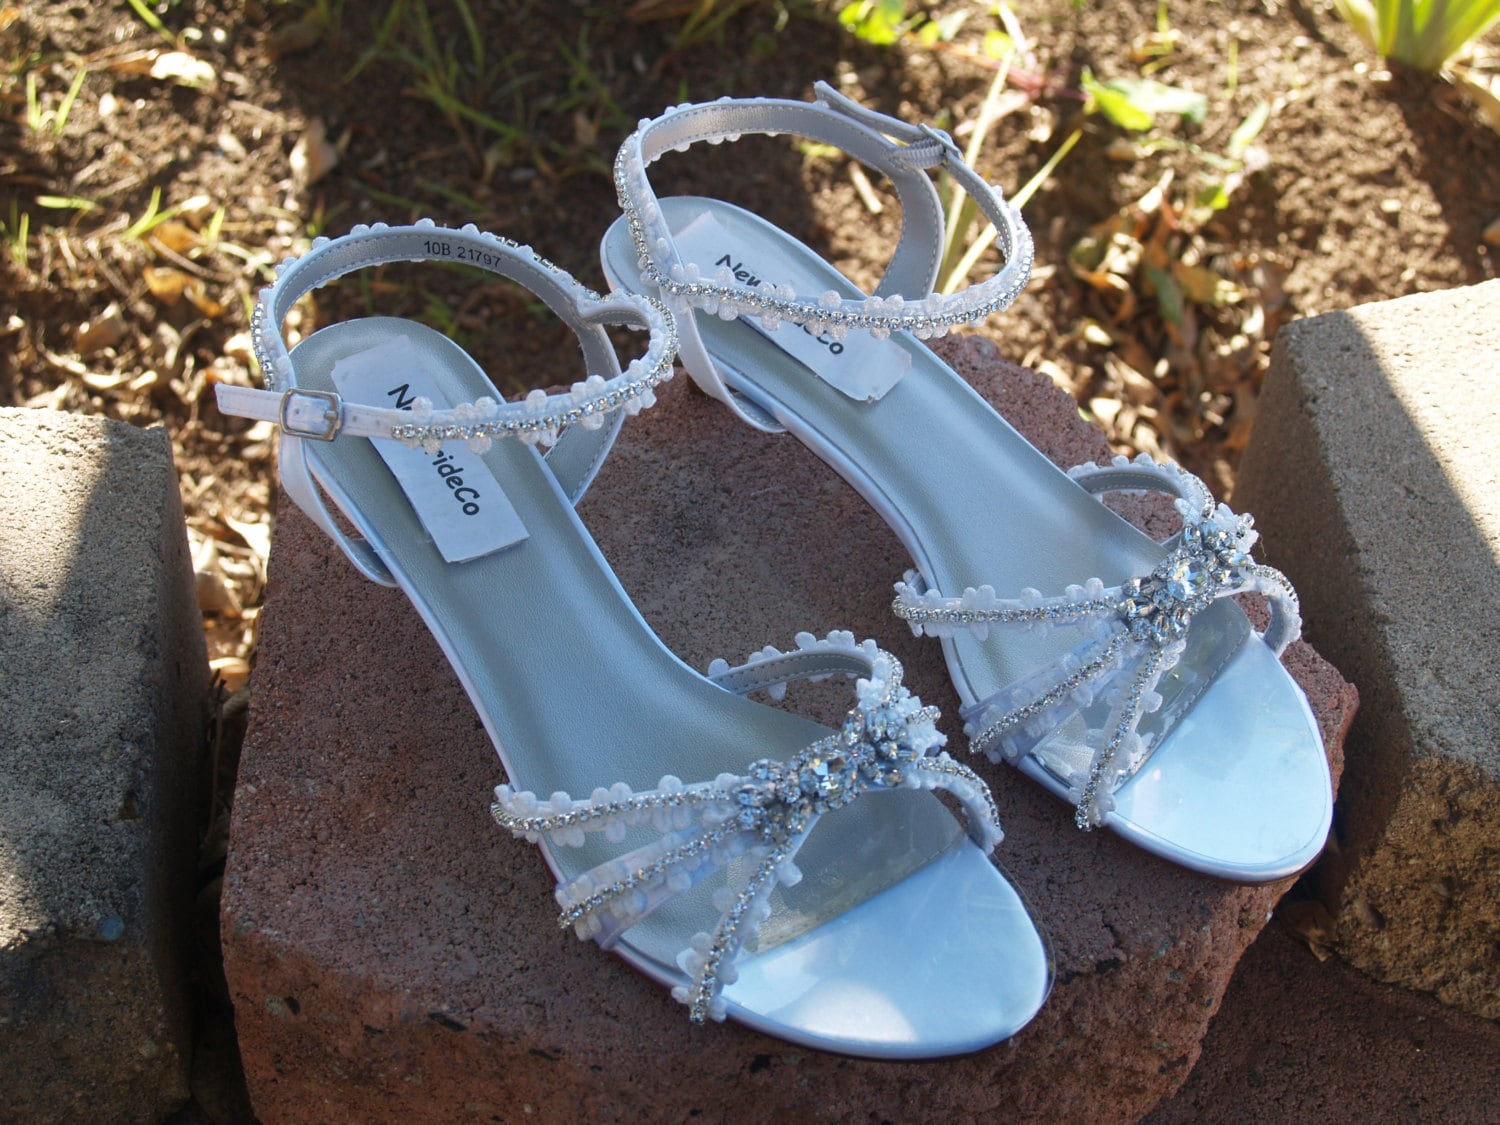 Lace Bridal Heels with Pearls, Bridesmaids Shoes, Women Heels, Prom Shoes